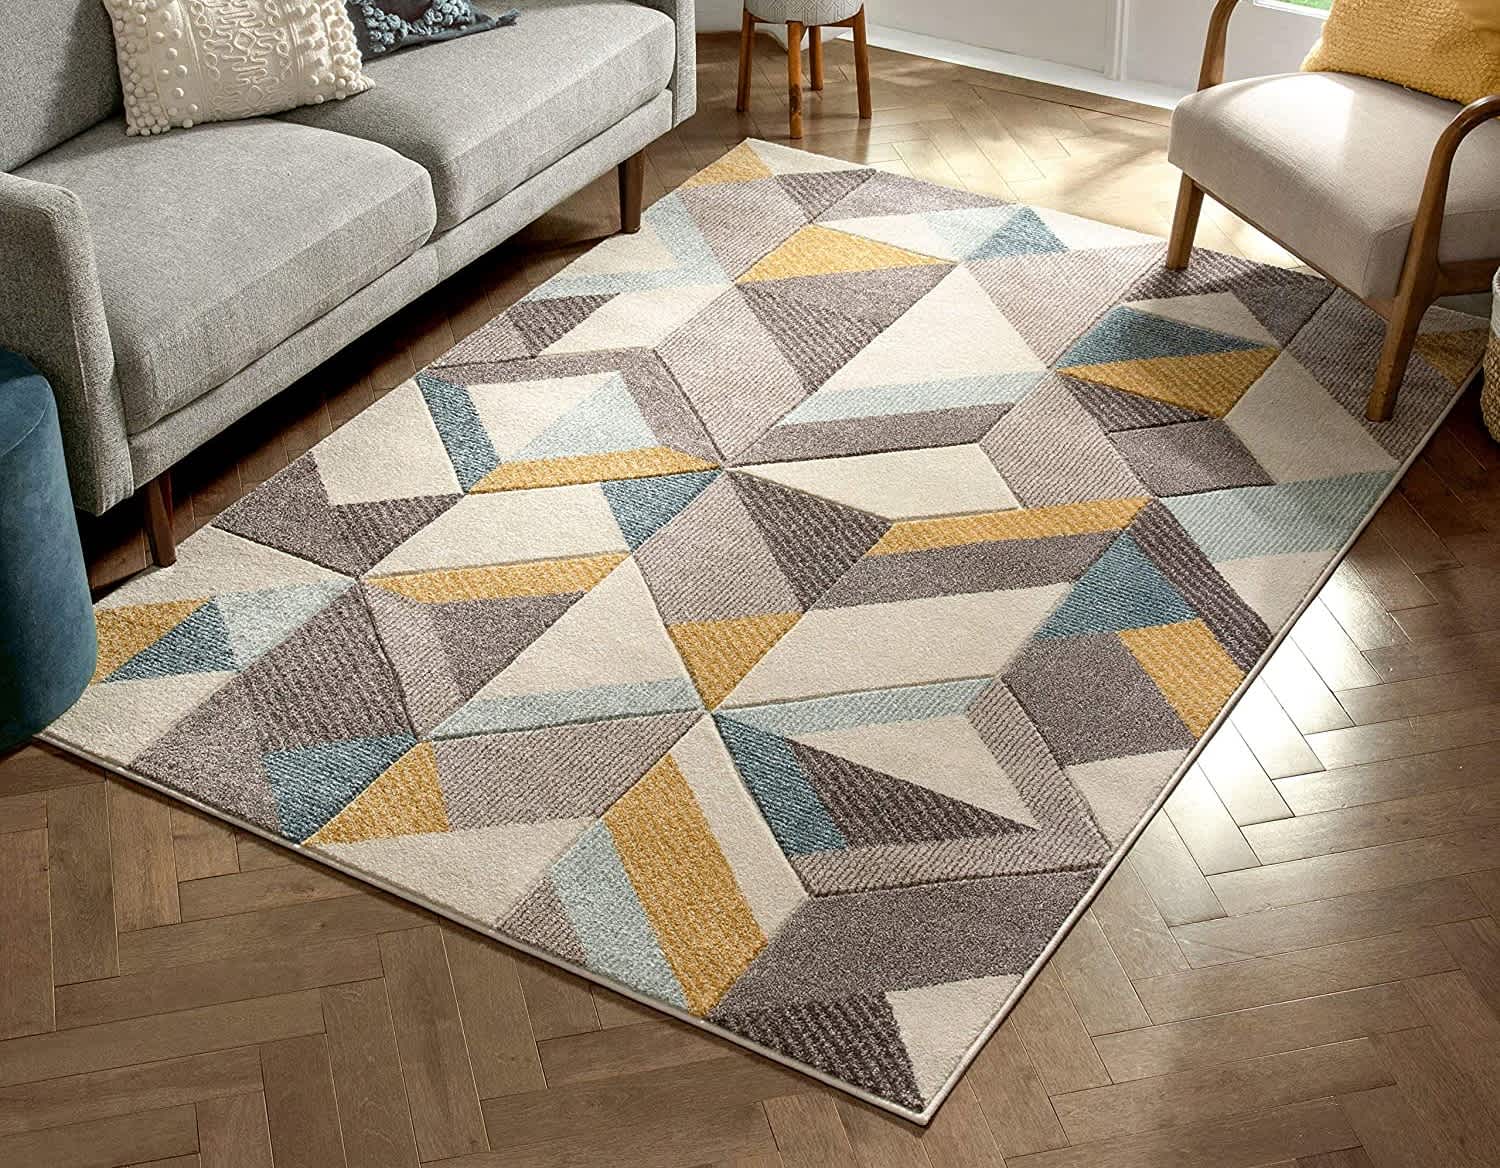 Yellow Rugs For Living Room Next